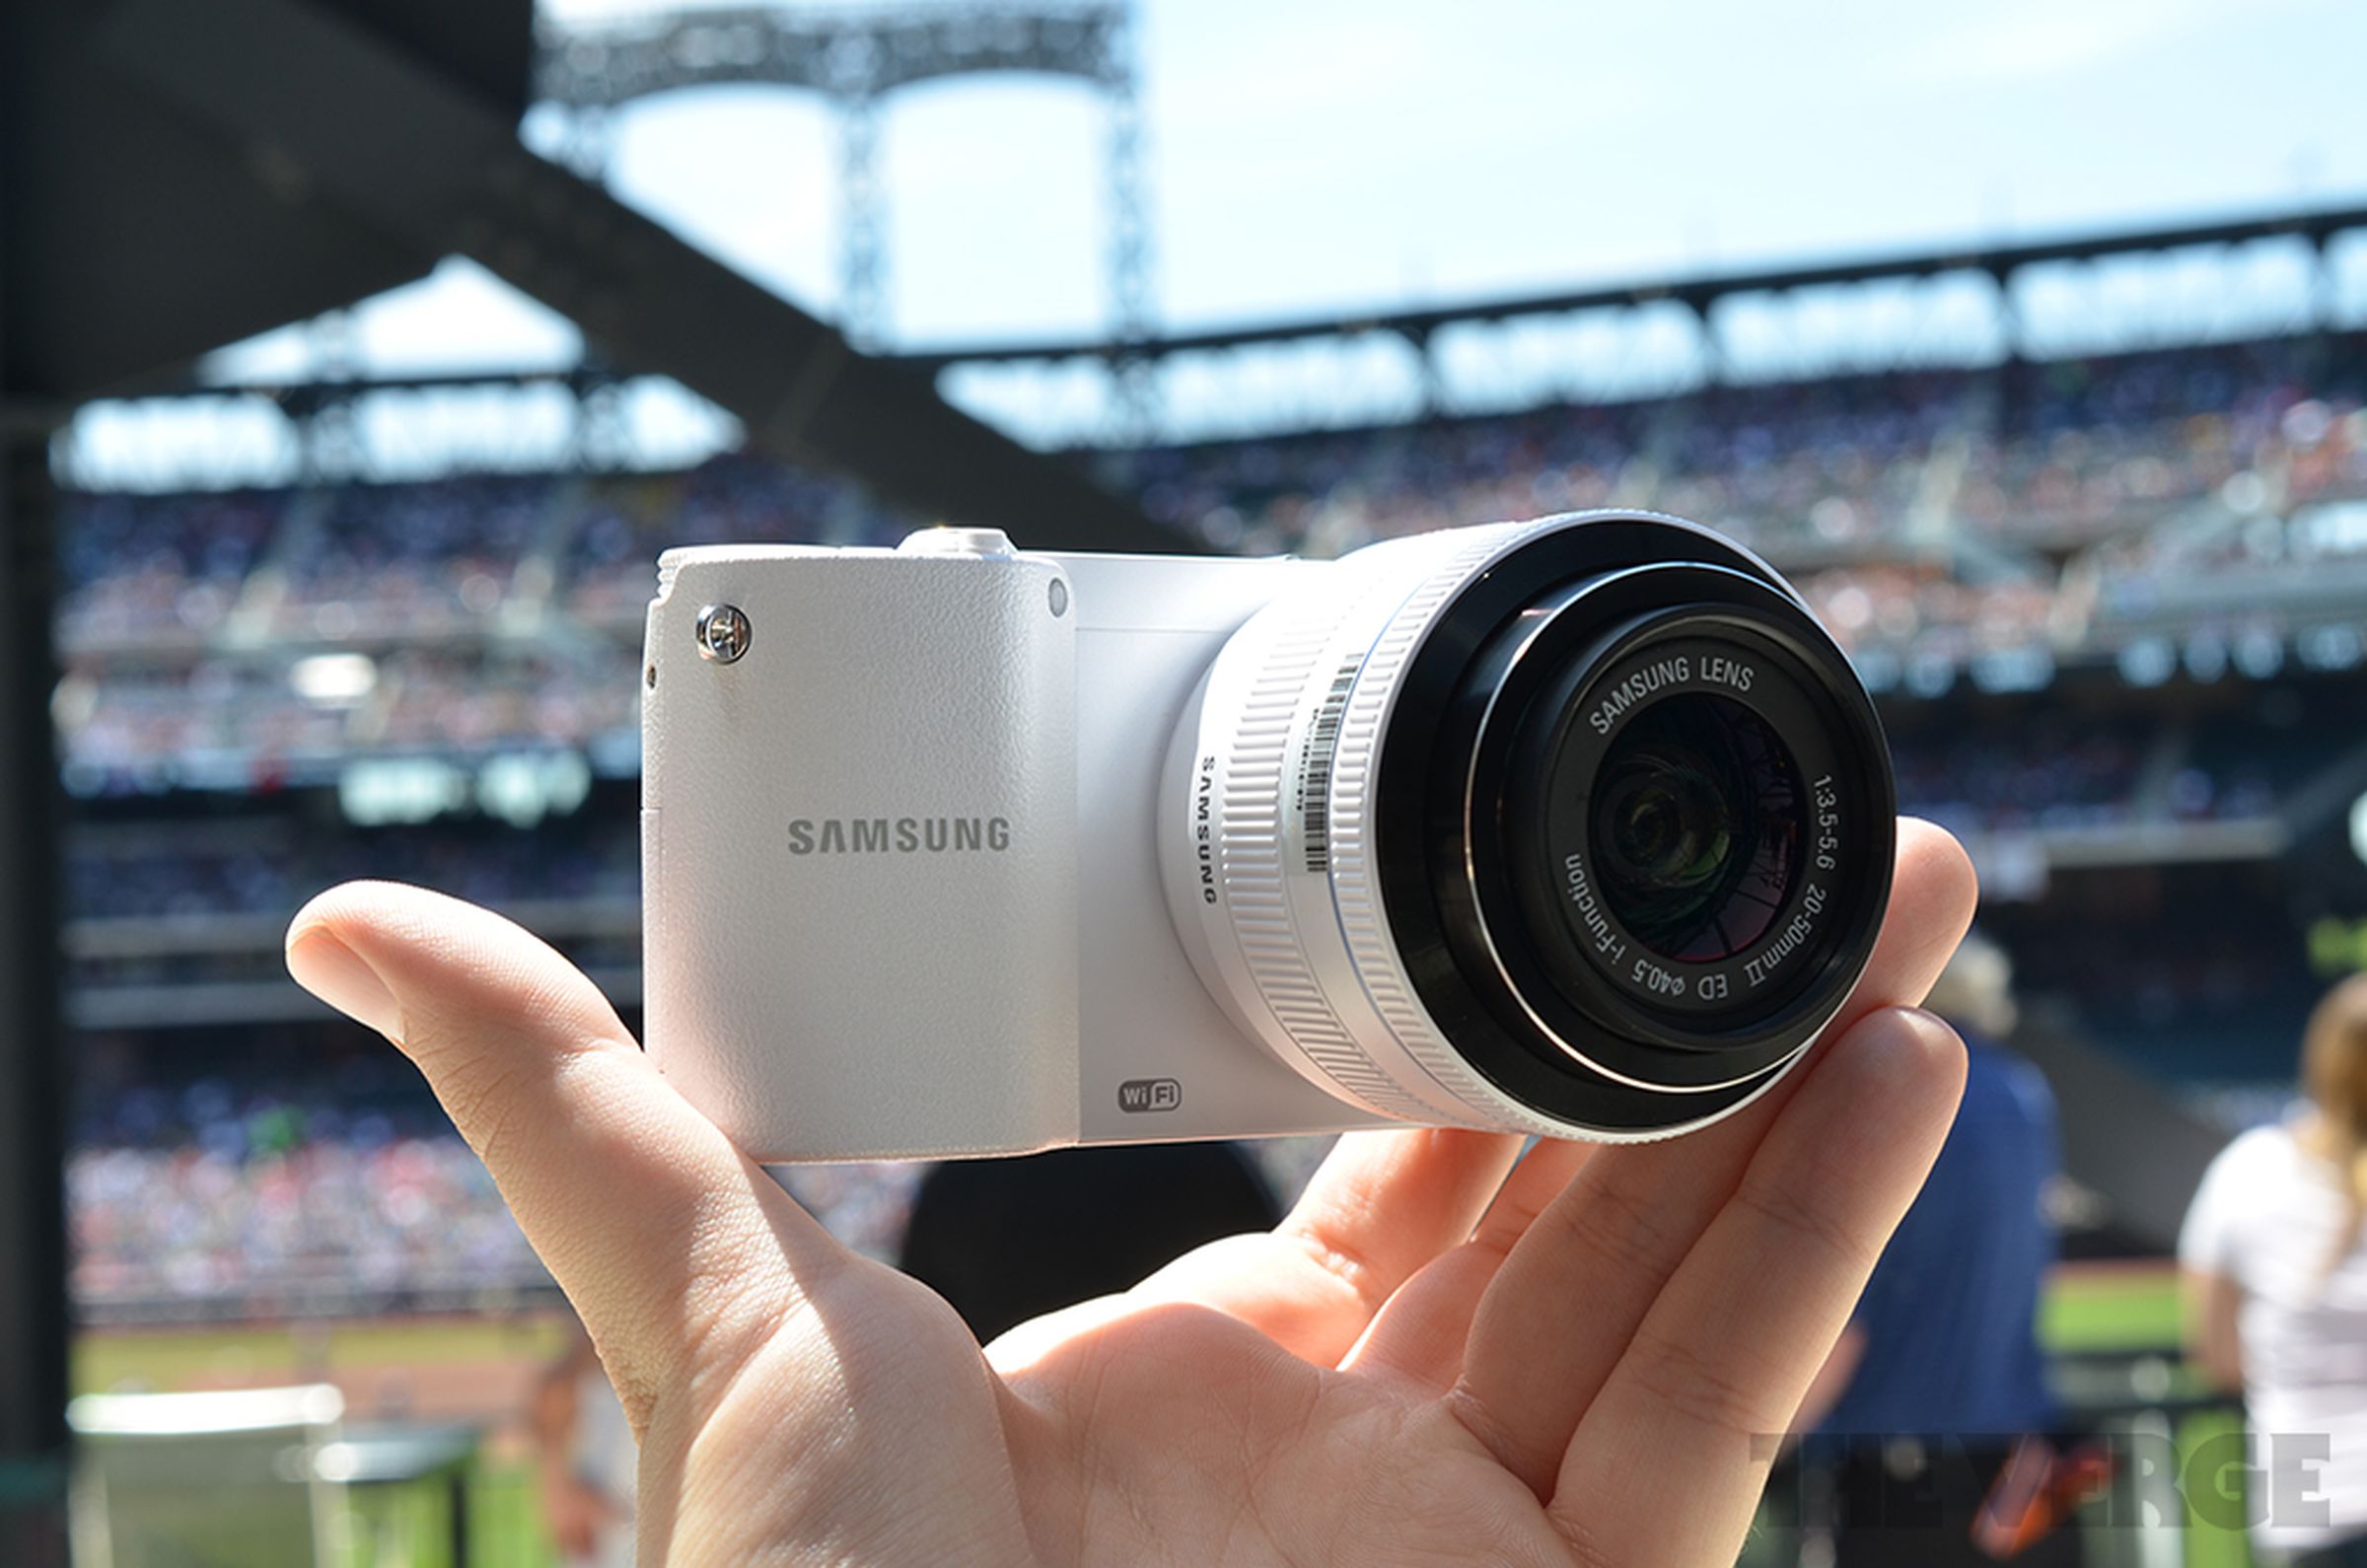 Samsung NX1000 hands-on pictures